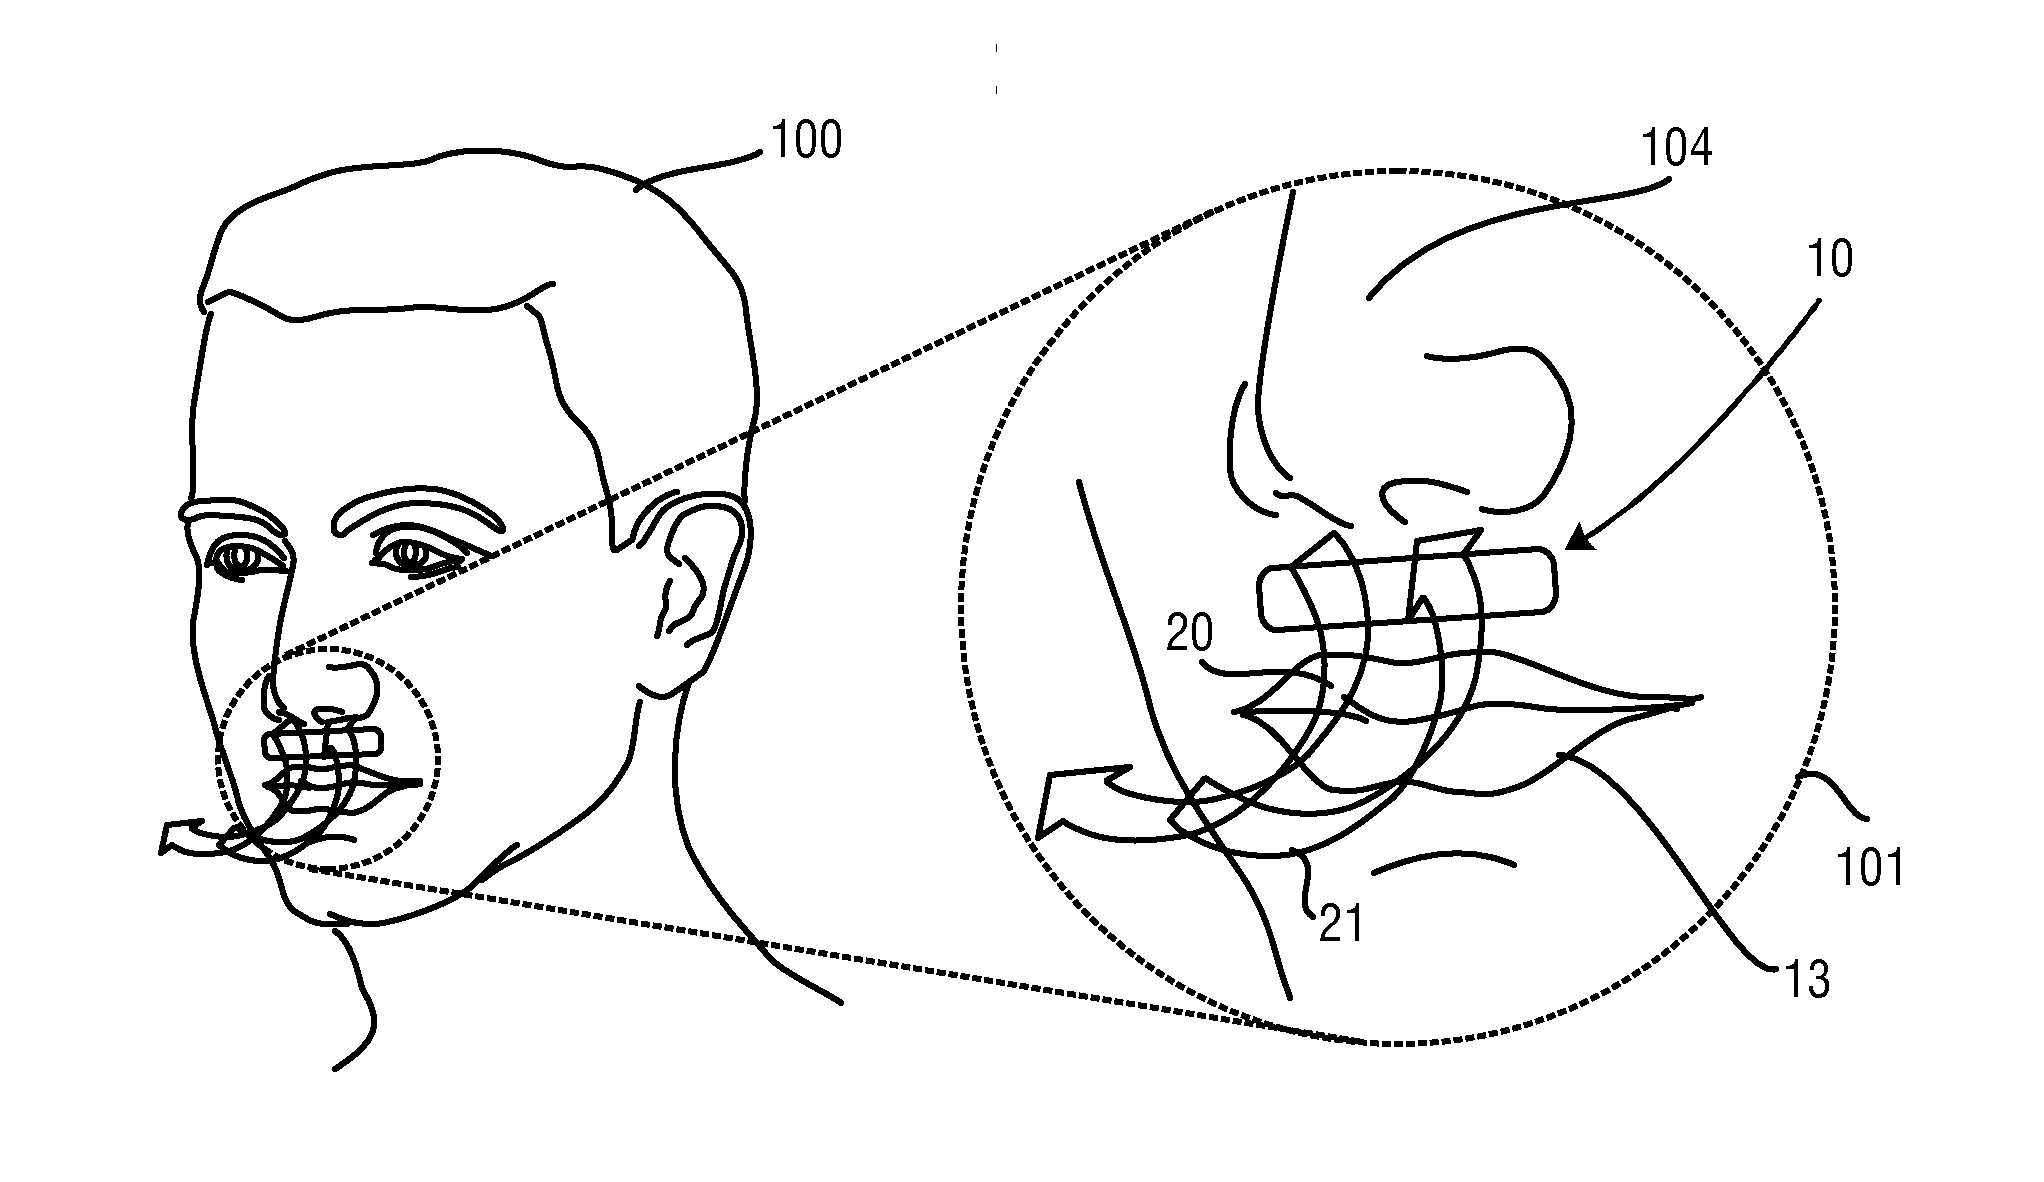 System and method for determining vital sign information of a subject